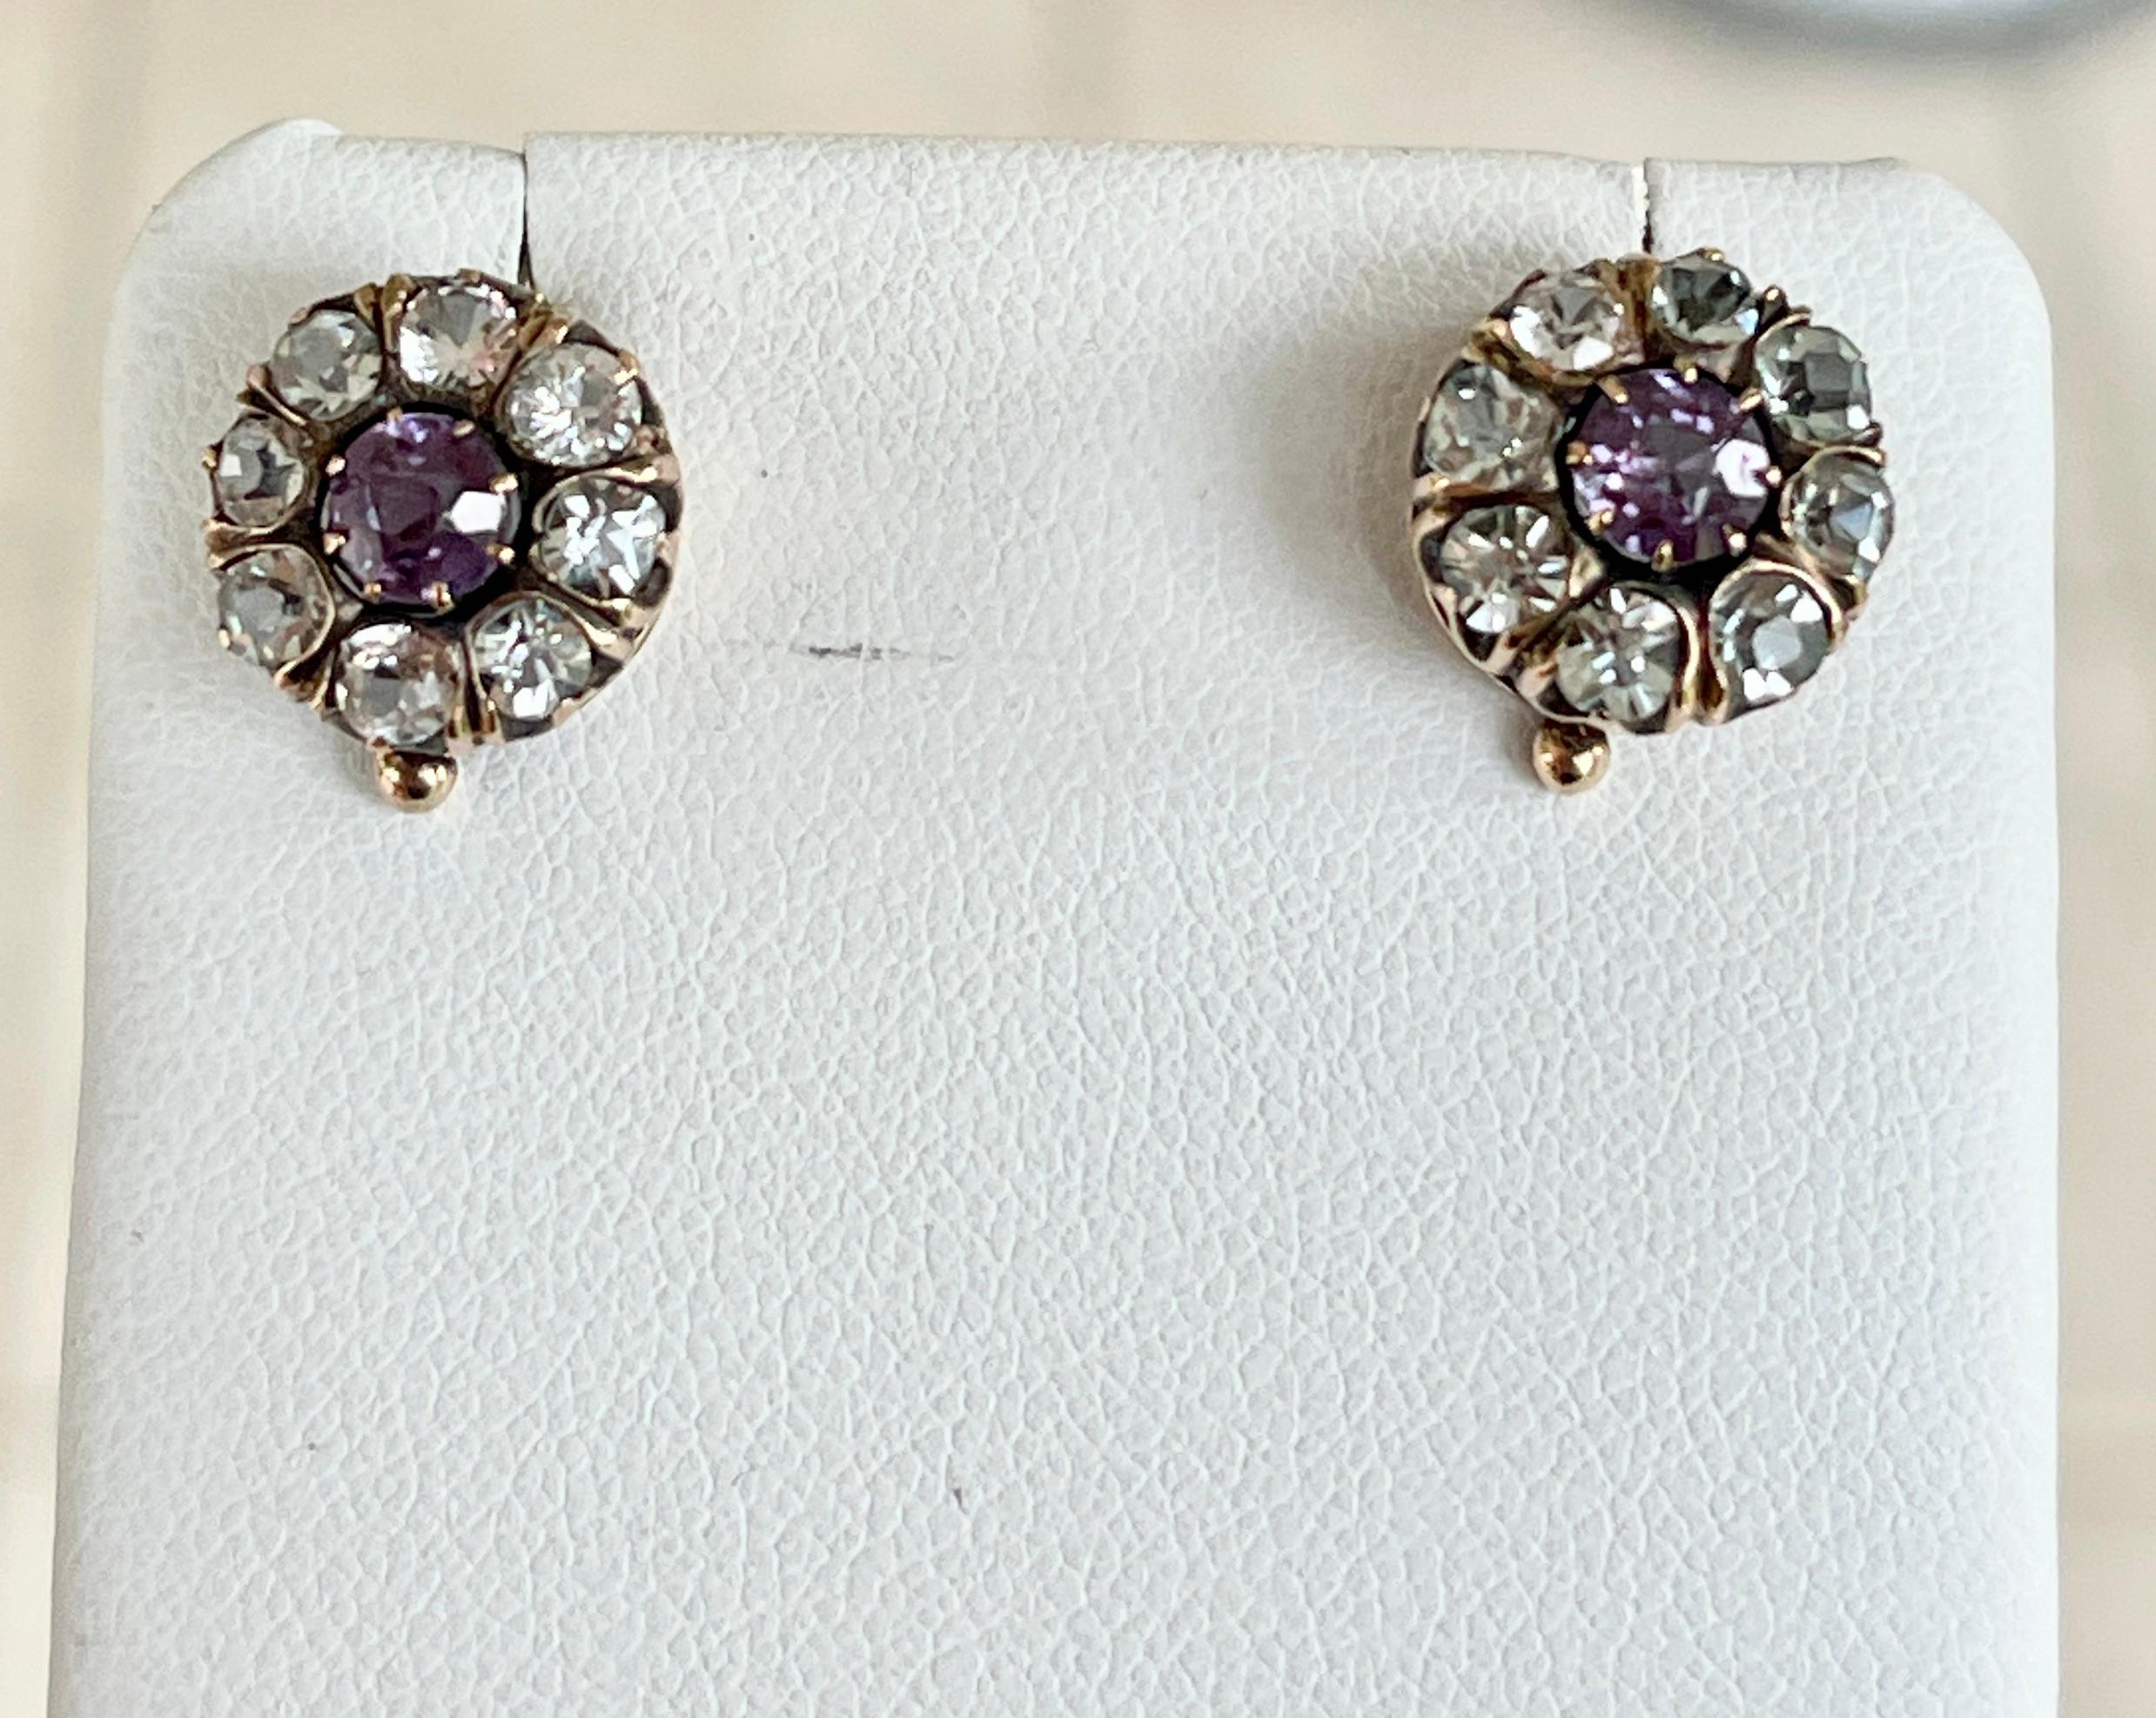 Antique 10ct Rose Gold Alexandrite Dormeuse Earrings Circa 1920s Valued $3150 For Sale 3